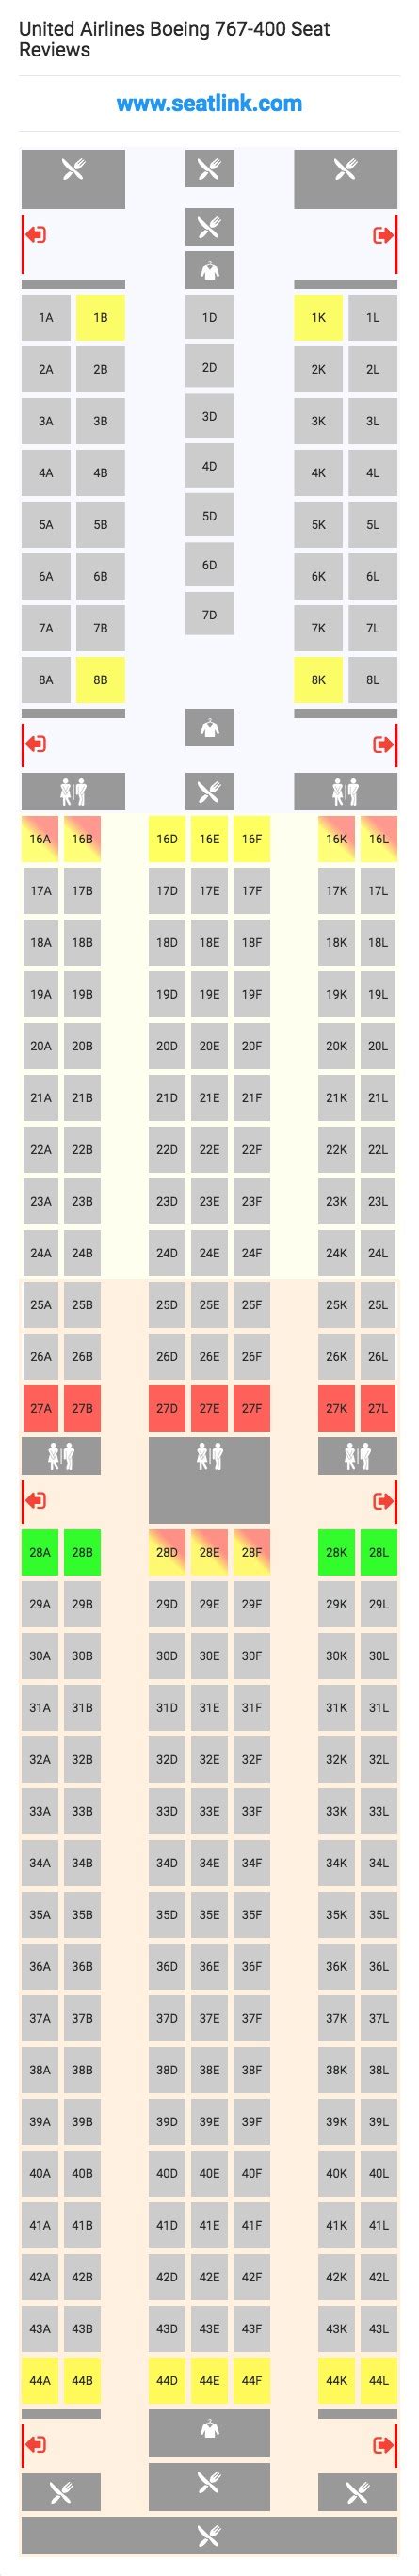 United Airlines Boeing 767 400 Seating Chart Updated December 2019